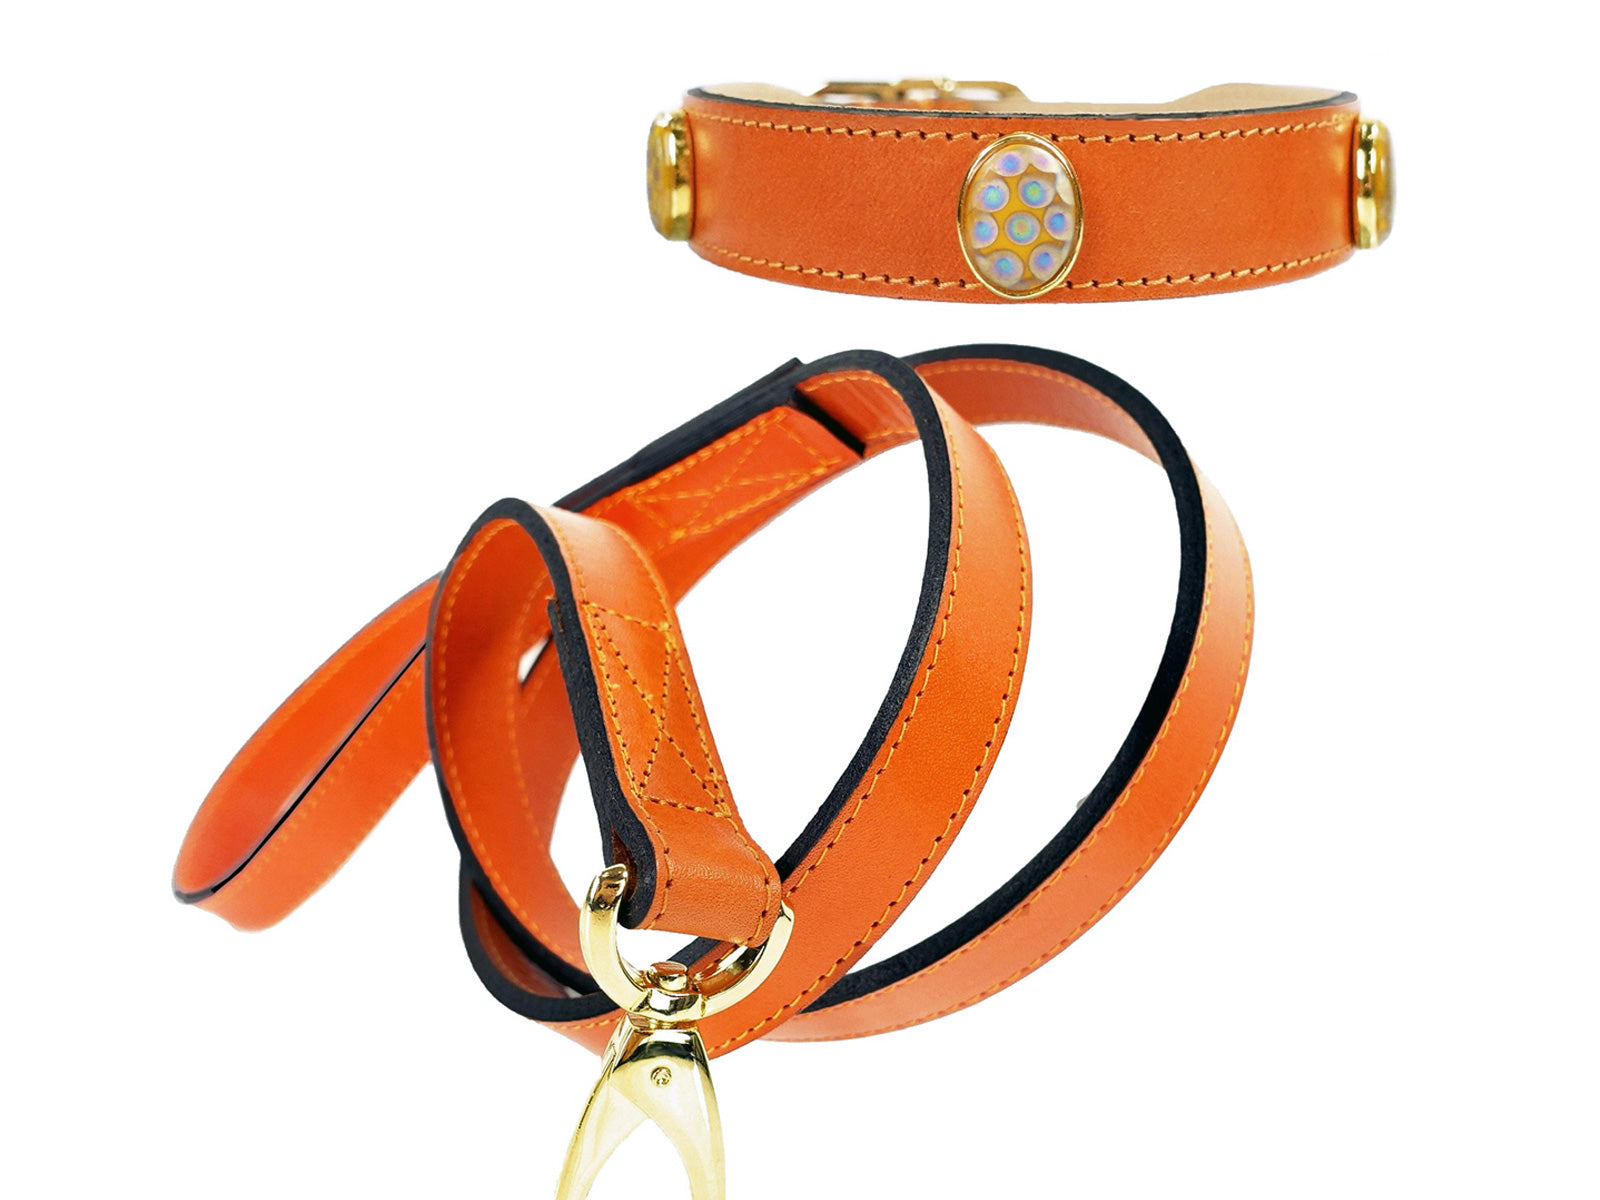 Peacock Luxury Dog Collar and Leash Collection